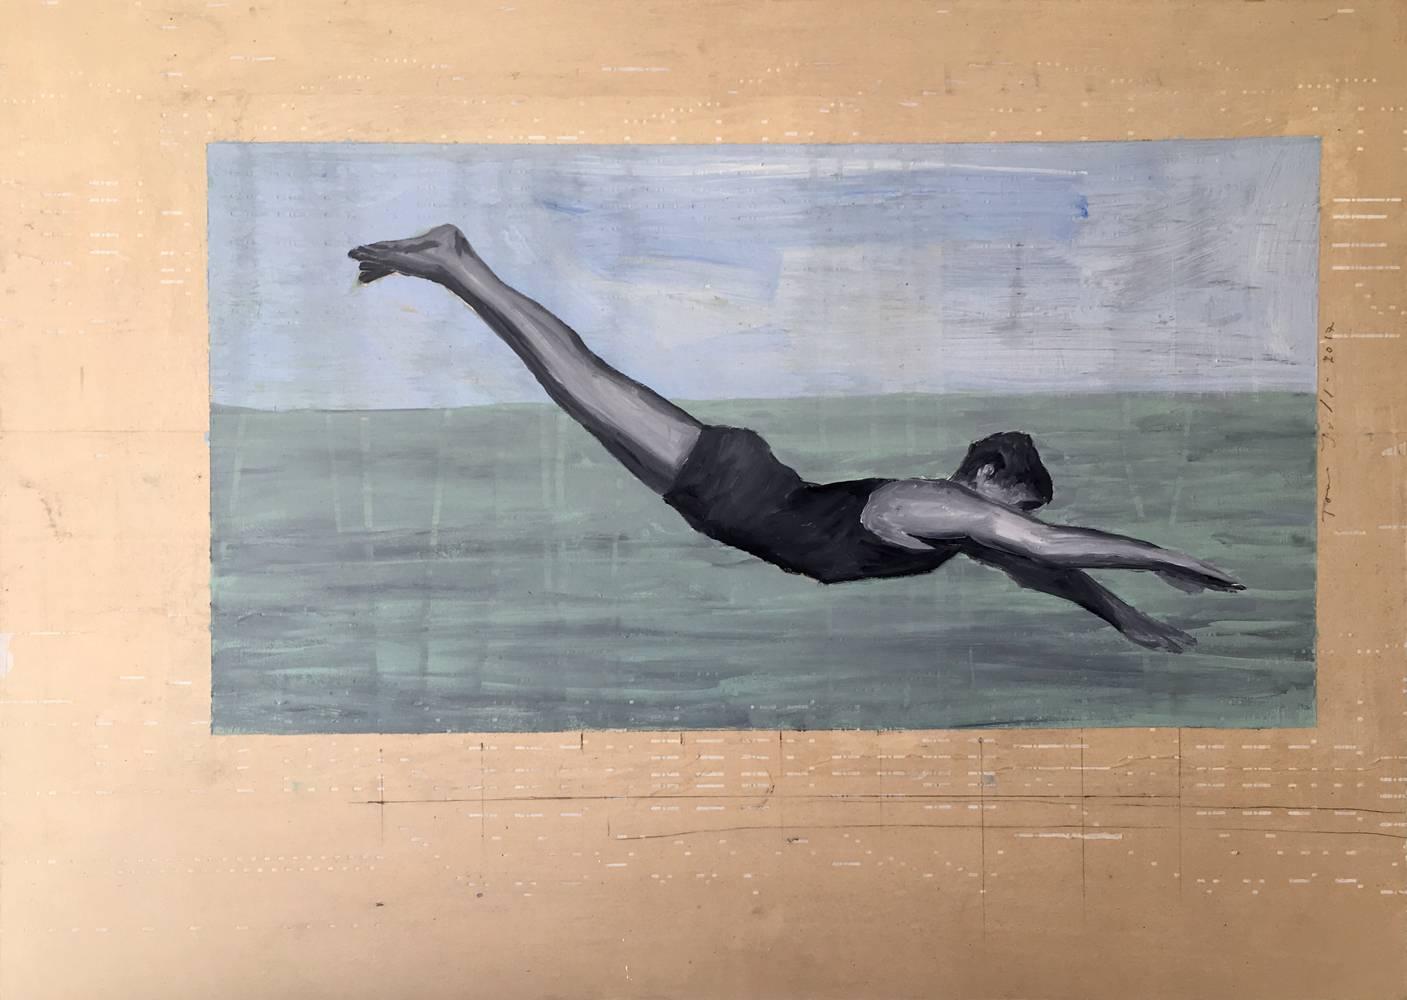 Tom Judd Figurative Painting - Diving Figures #5